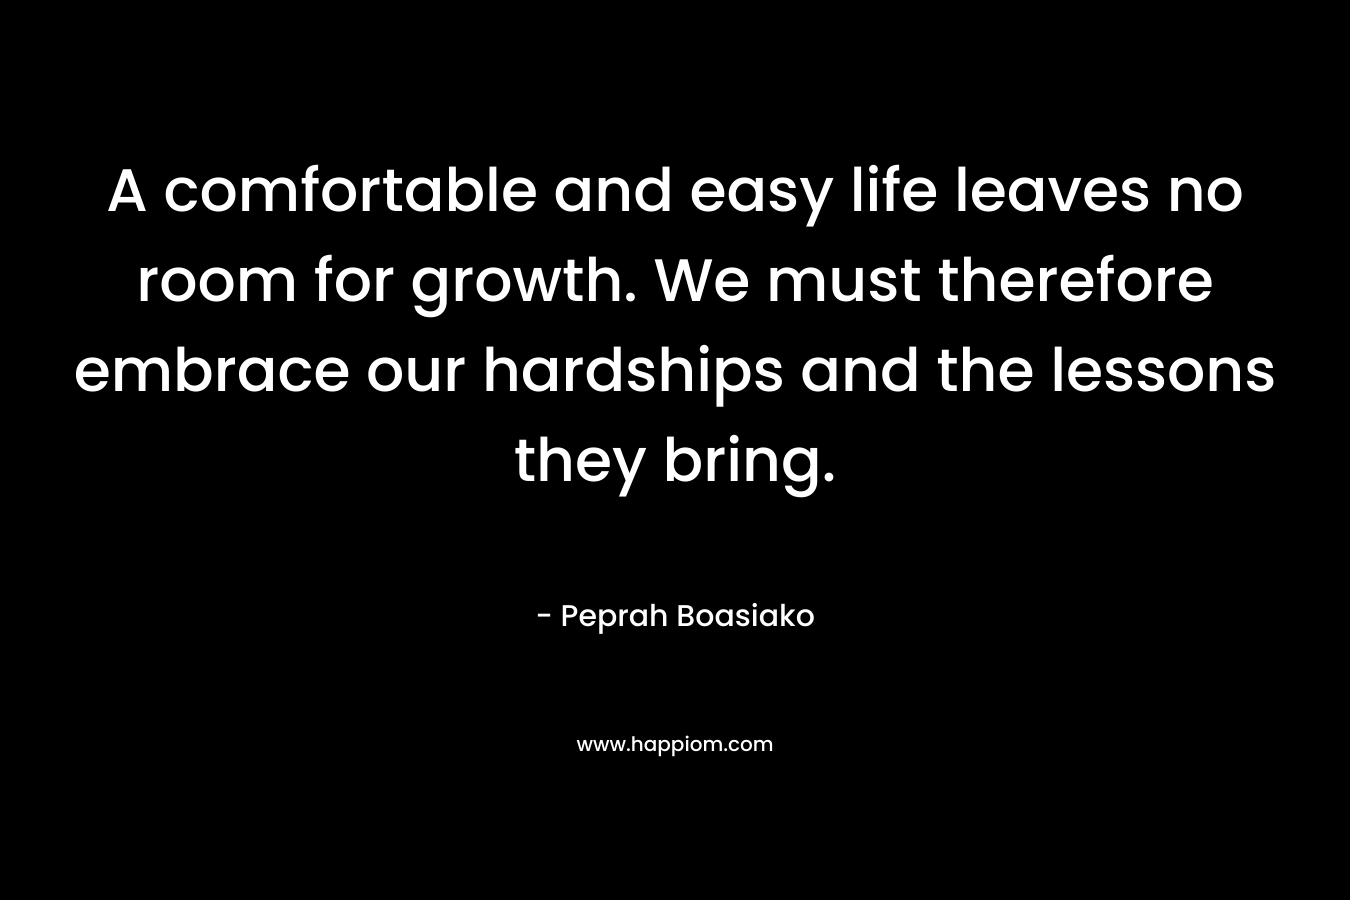 A comfortable and easy life leaves no room for growth. We must therefore embrace our hardships and the lessons they bring. – Peprah Boasiako